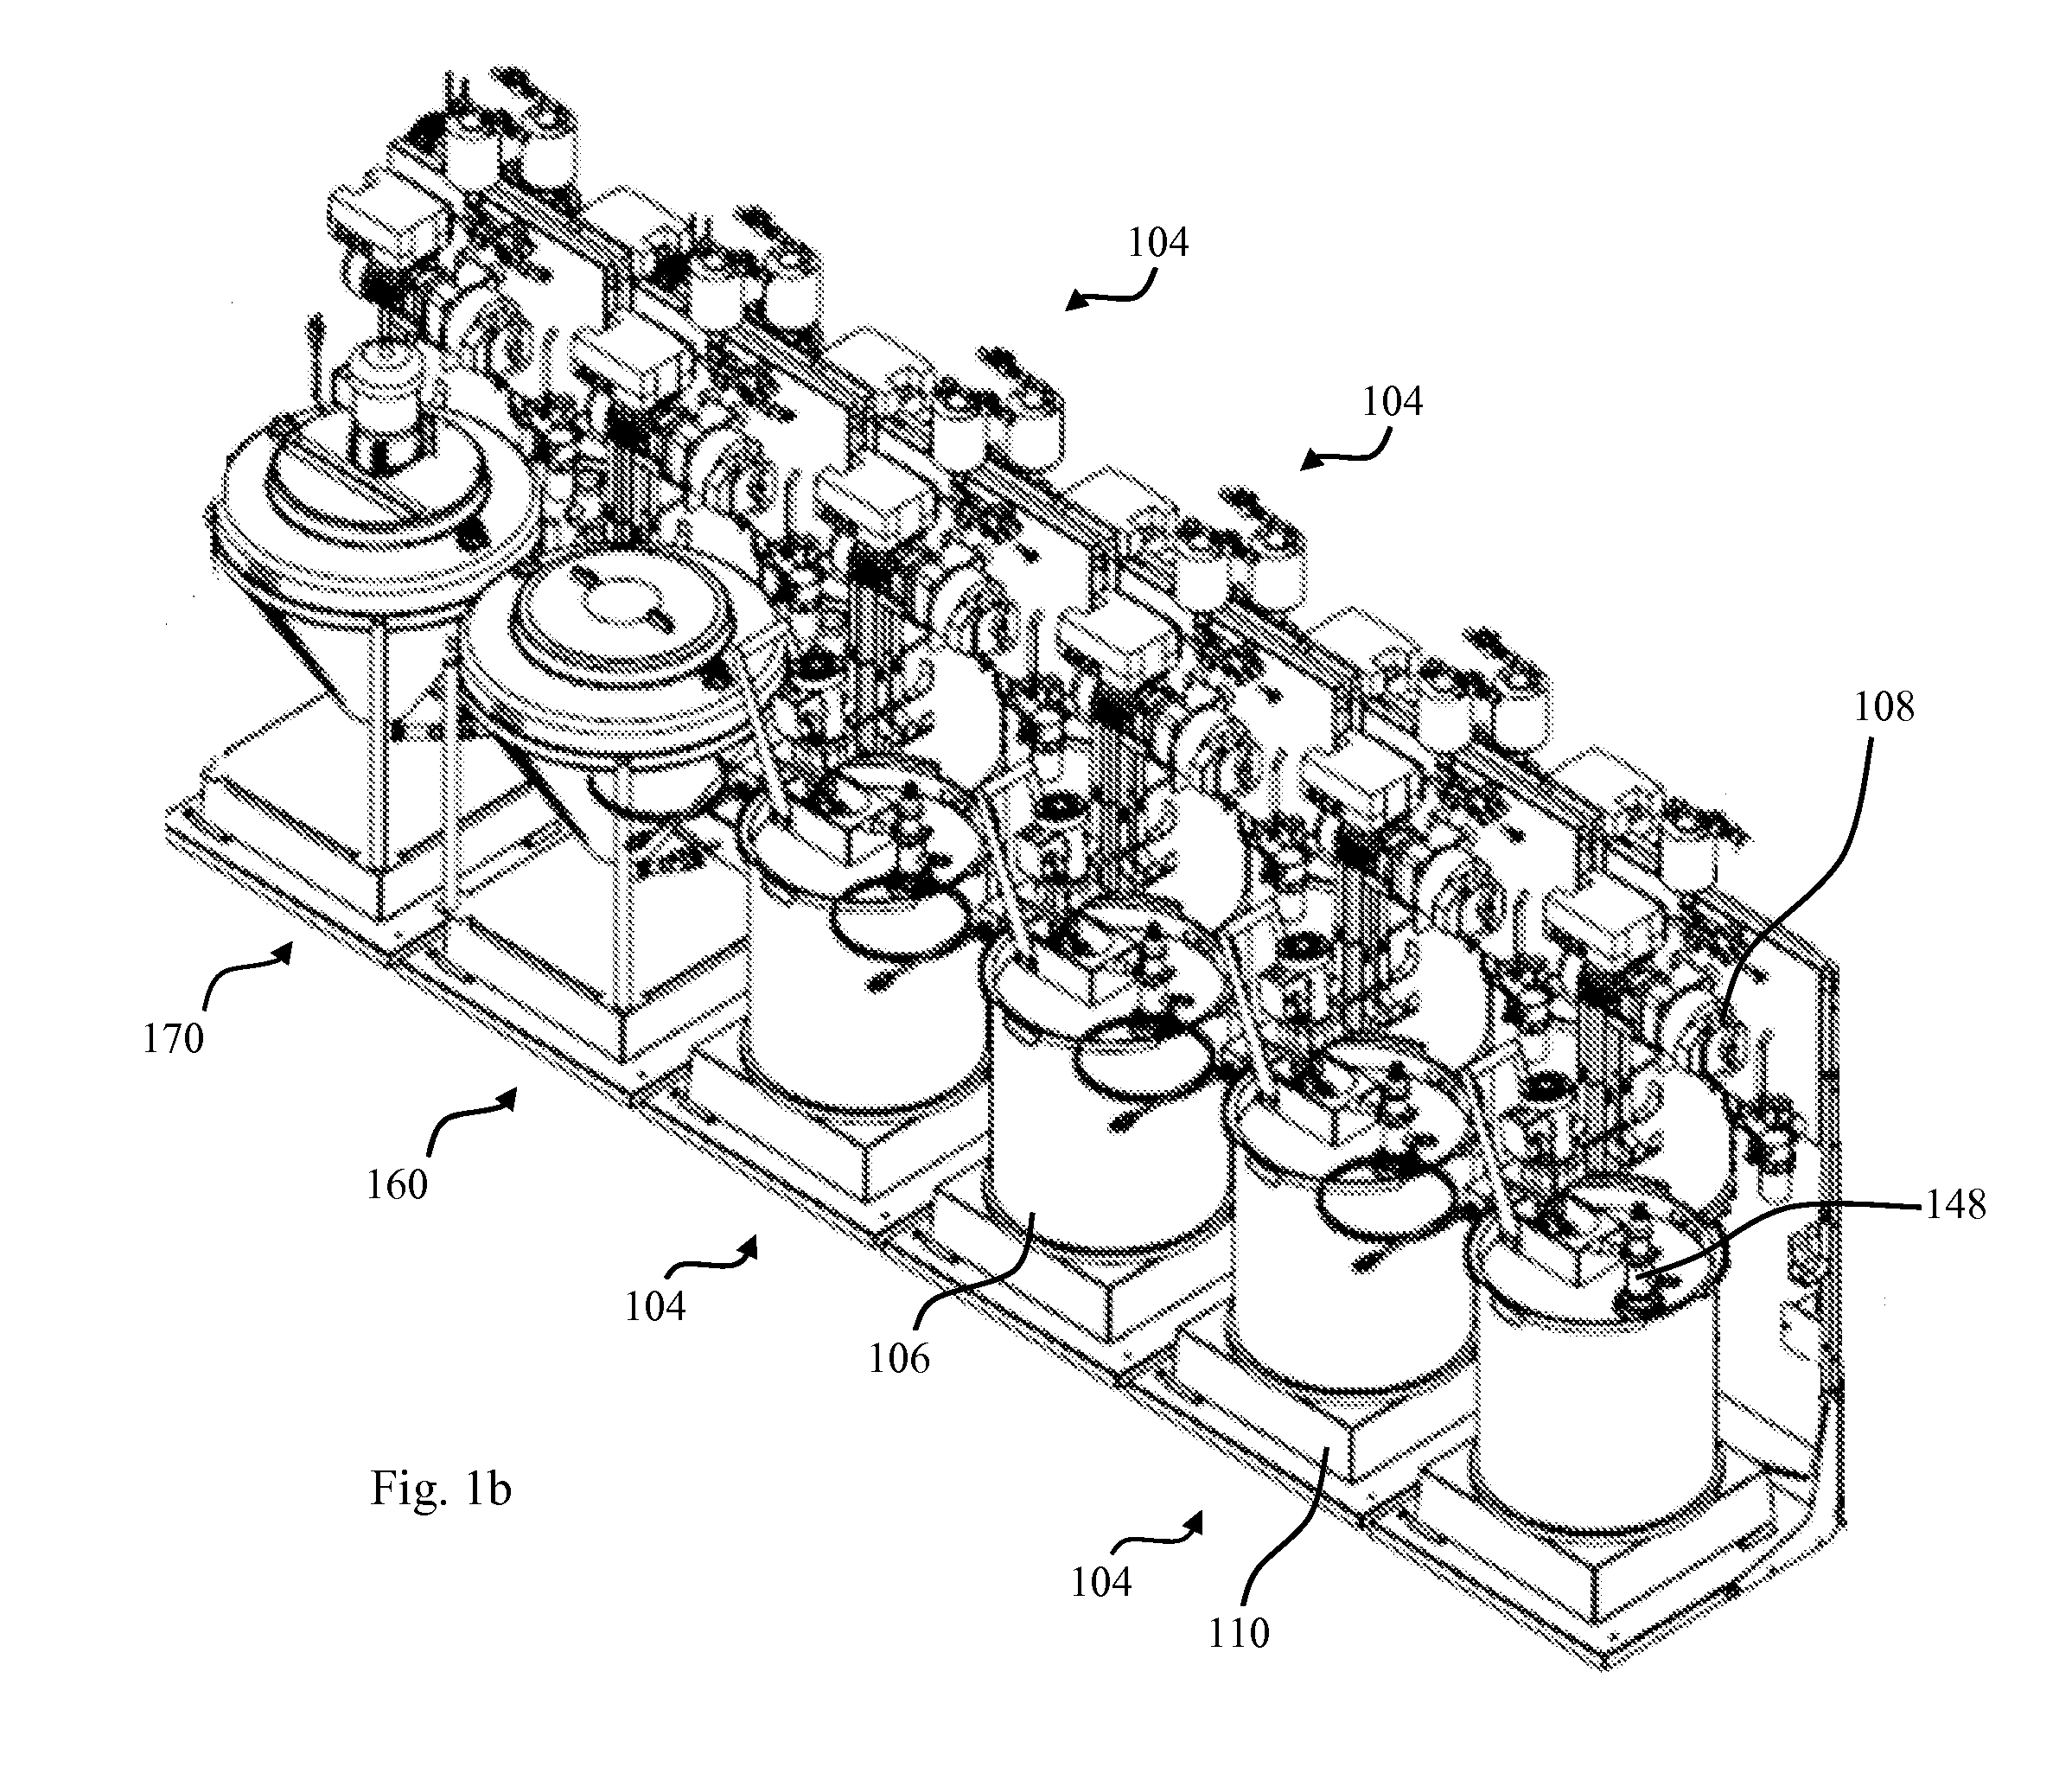 Seed treatment facilities, methods and apparatus